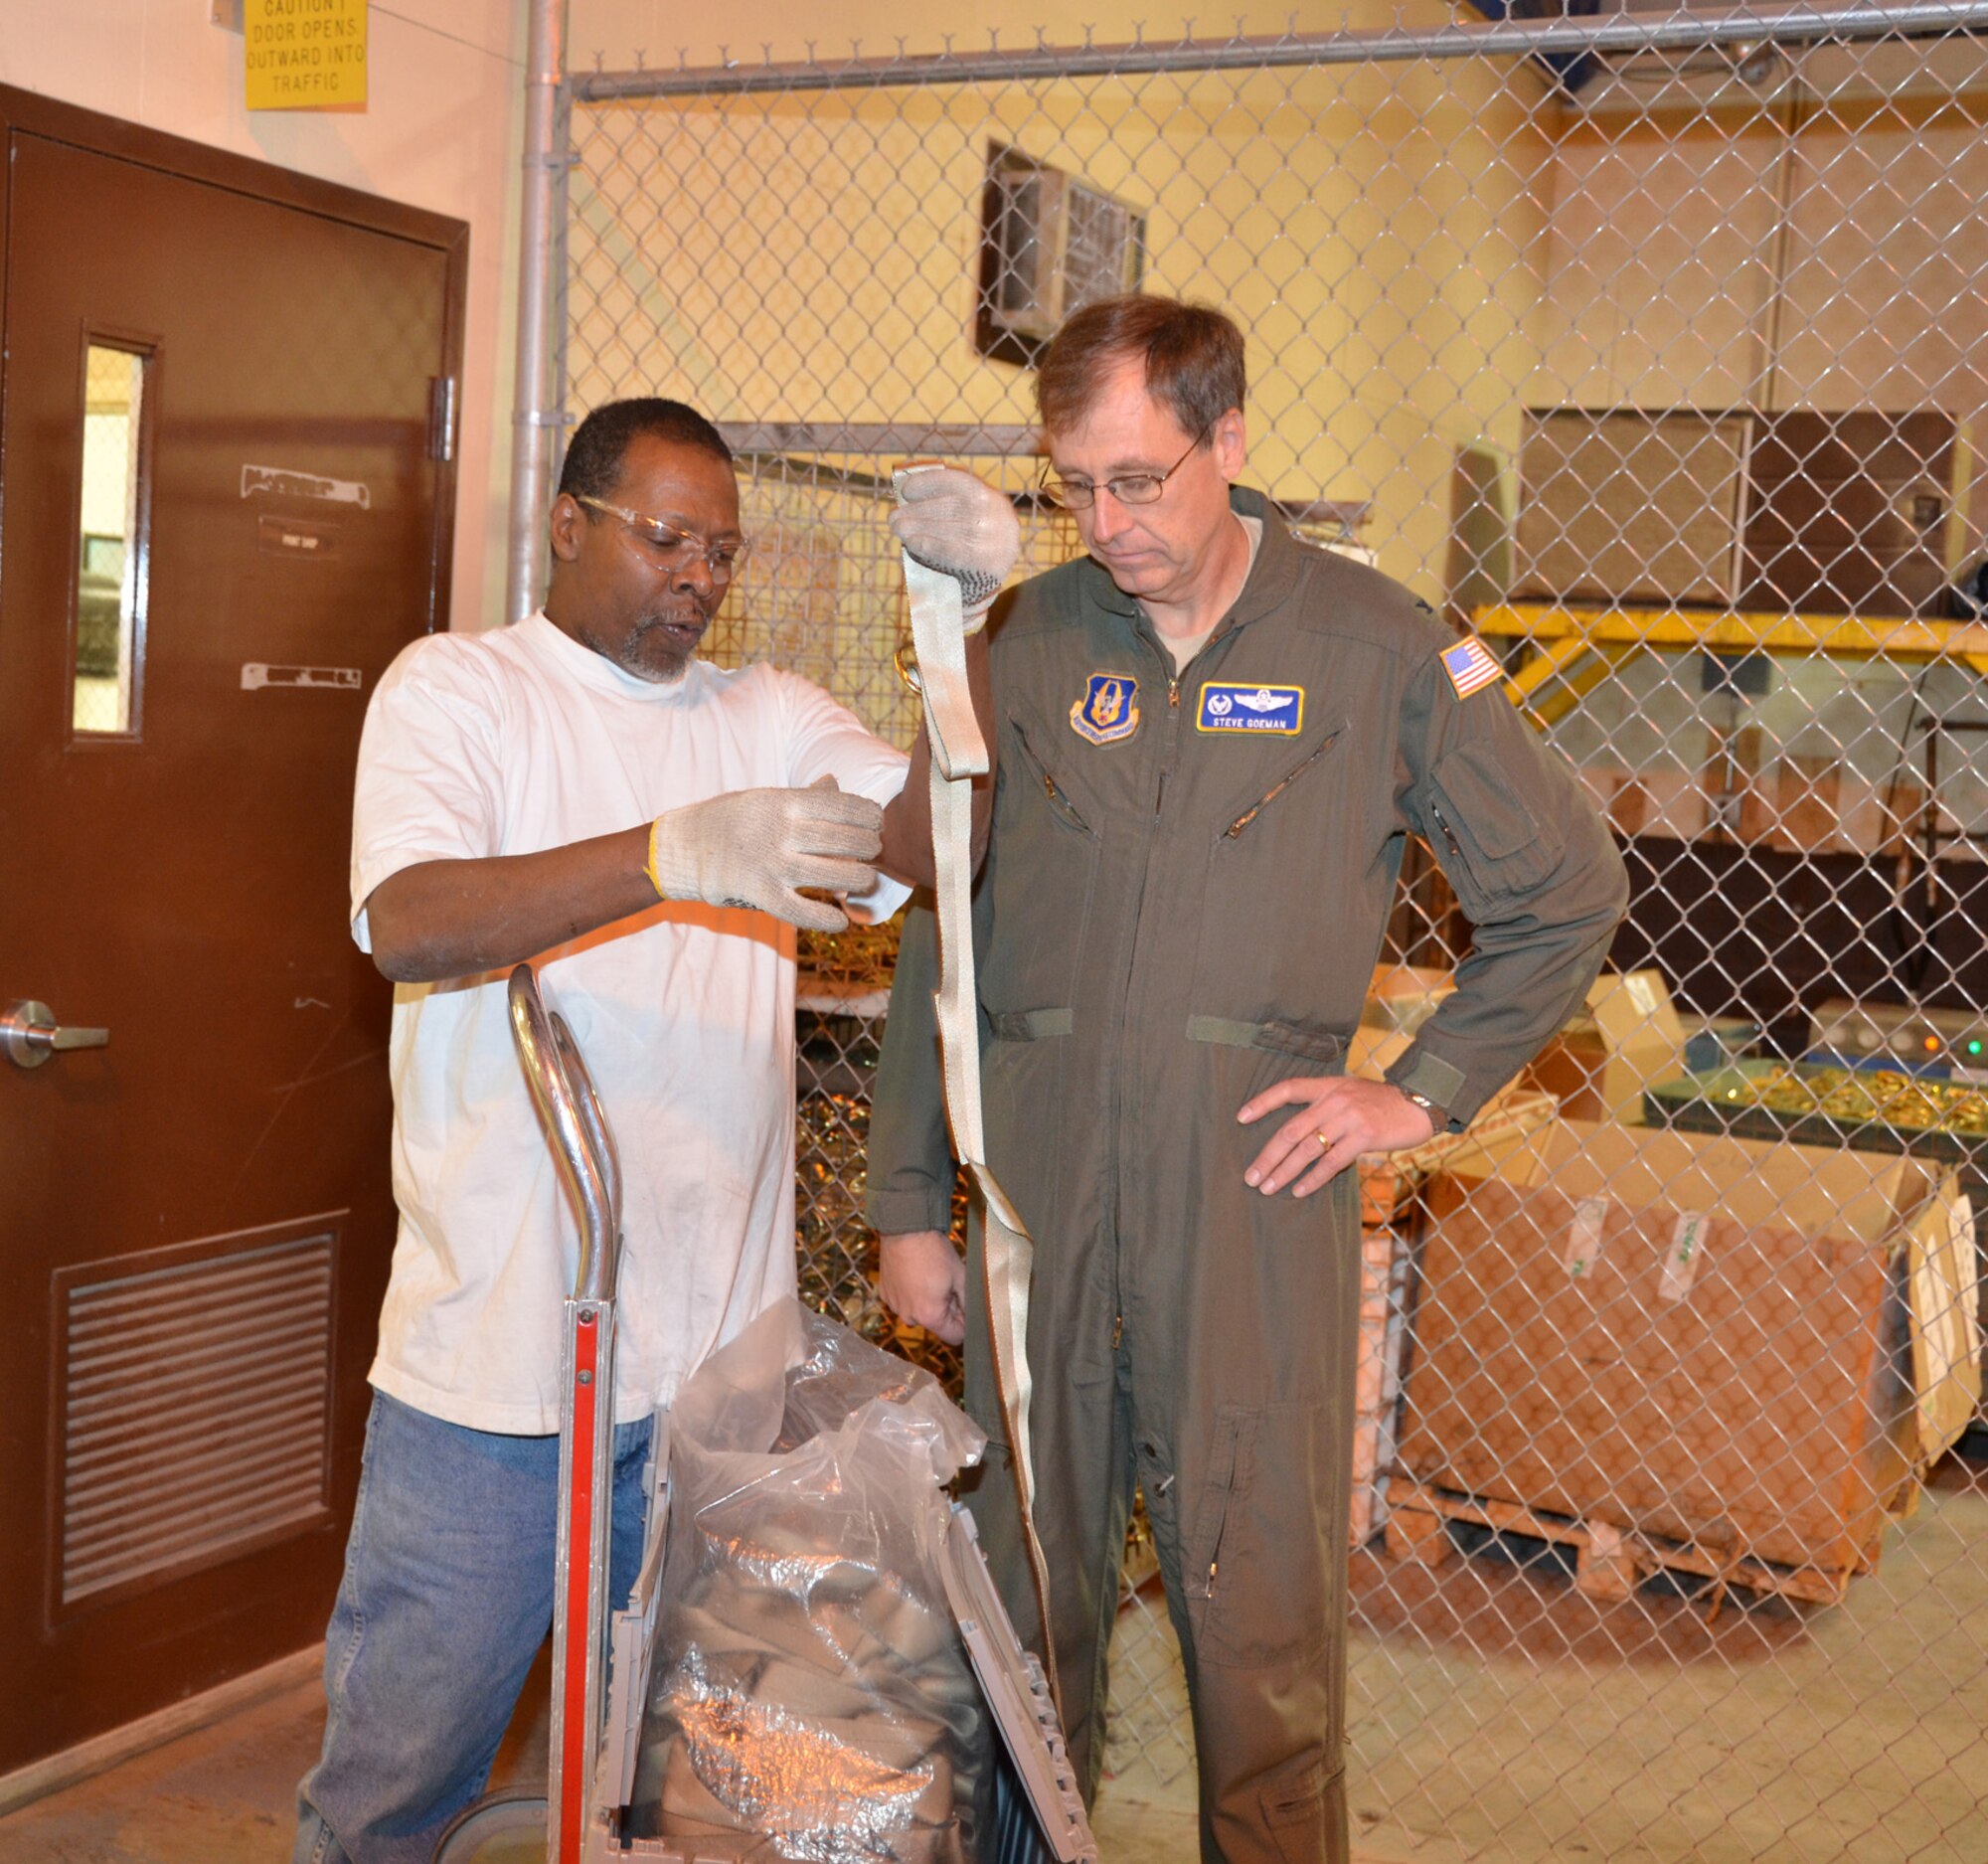 WRIGHT-PATTERSON AIR FORCE BASE, Ohio – Keith Lawson, TAC employee, shows Col. Stephen Goeman, 445th Airlift Wing commander, straps used to repair cargo nets during the wing’s visit to TAC Enterprises Dec. 19. (U.S. Air Force photo/Lt. Col. Cynthia Harris)